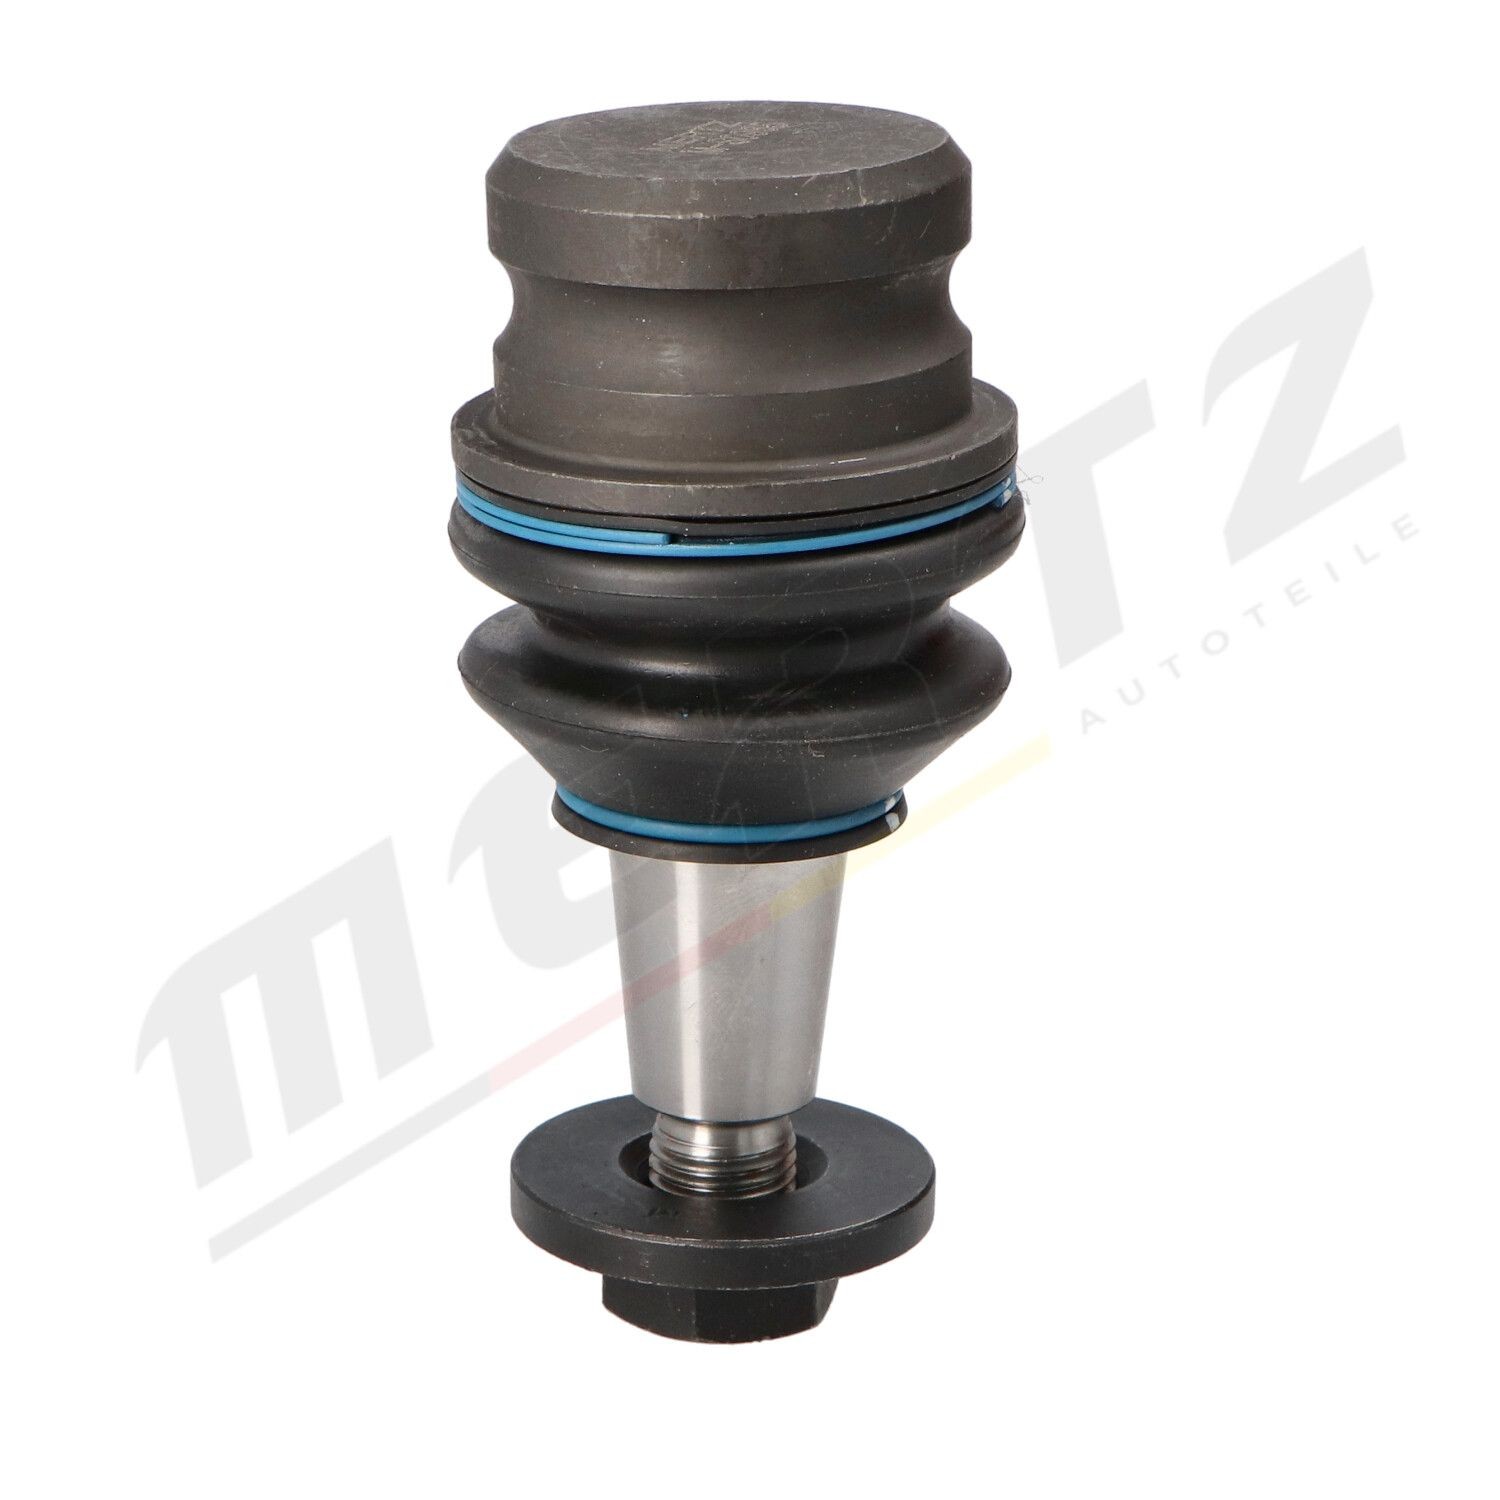 M-S0965 Suspension ball joint M-S0965 MERTZ Front Axle Left, Front Axle Right, Lower, with nut, 18,5mm, M14x1,5mm